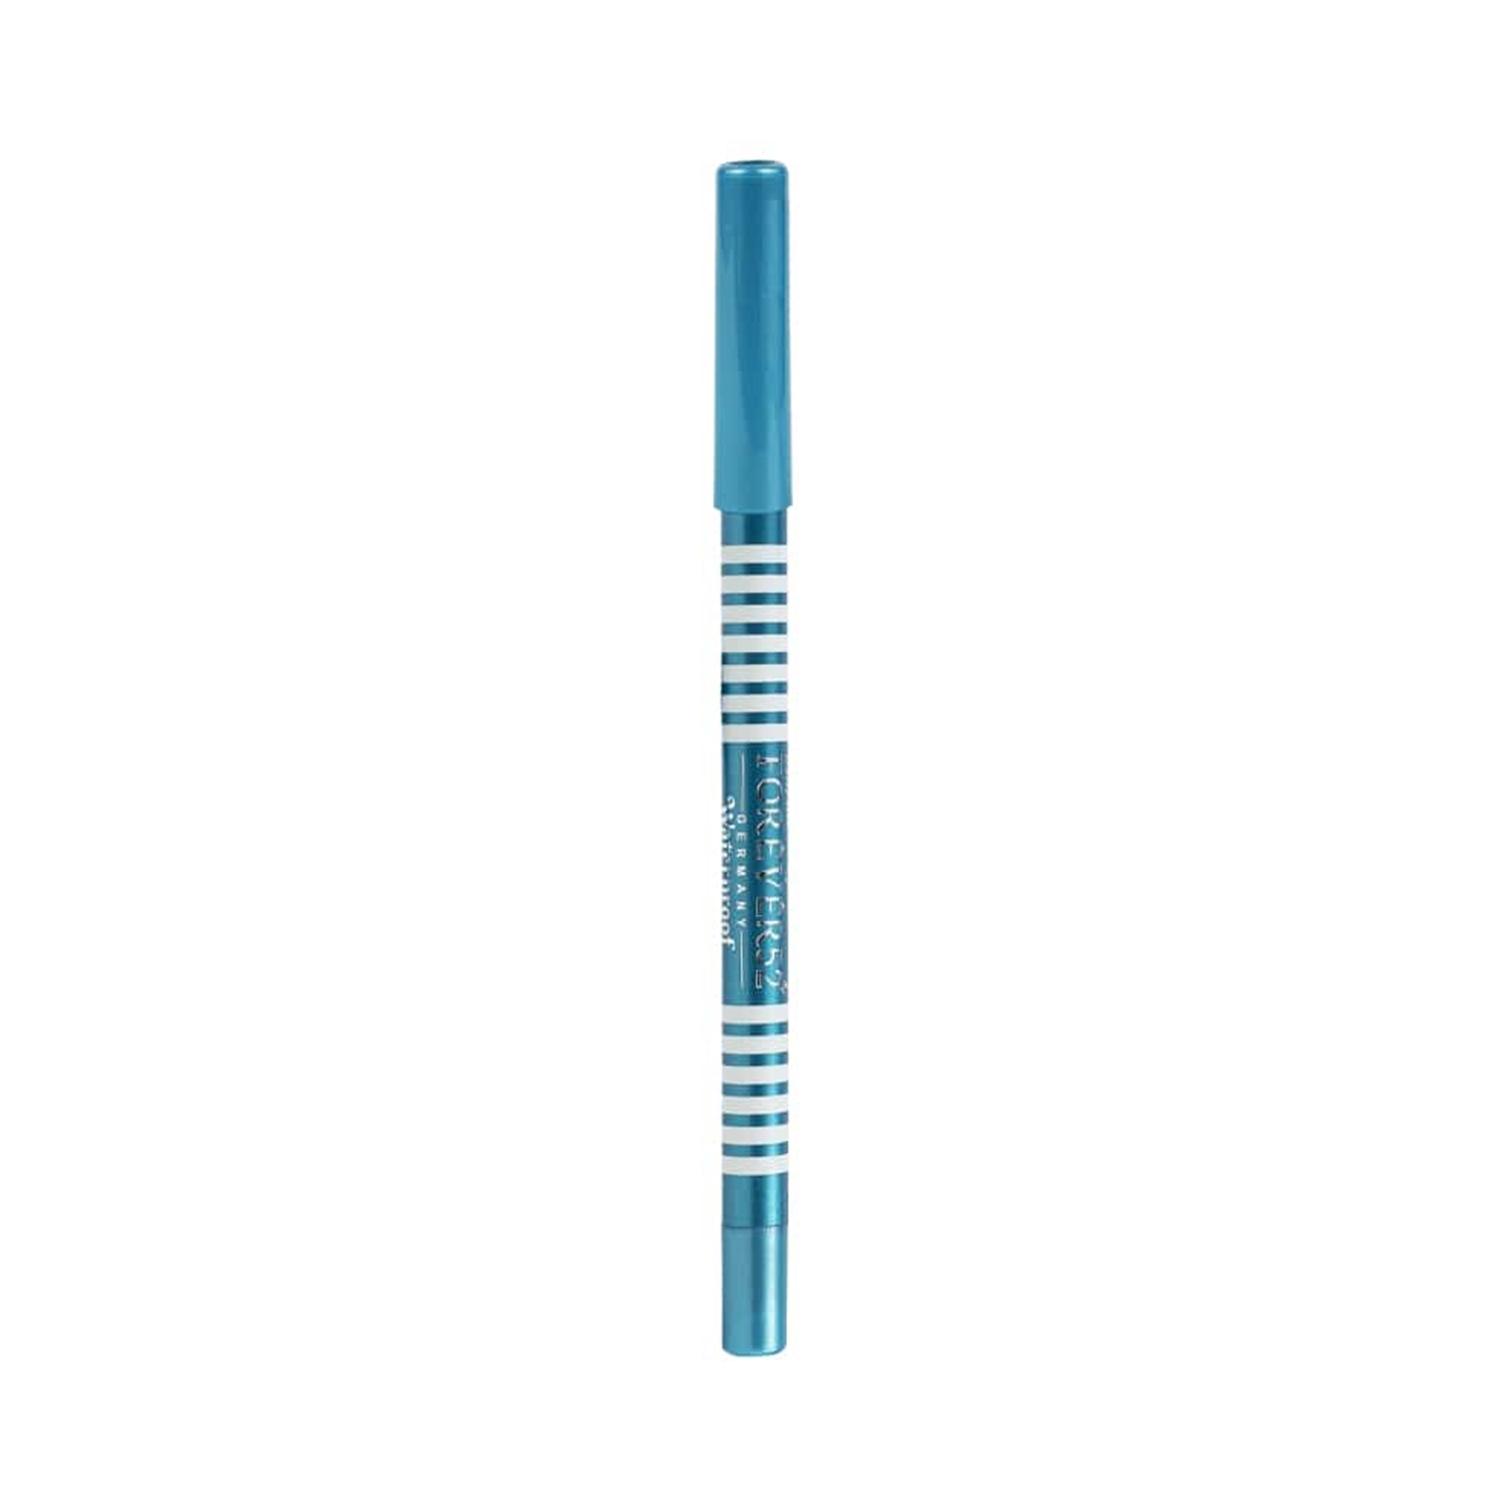 daily life forever52 waterproof smoothening eye pencil sapphire f504 (1gm)